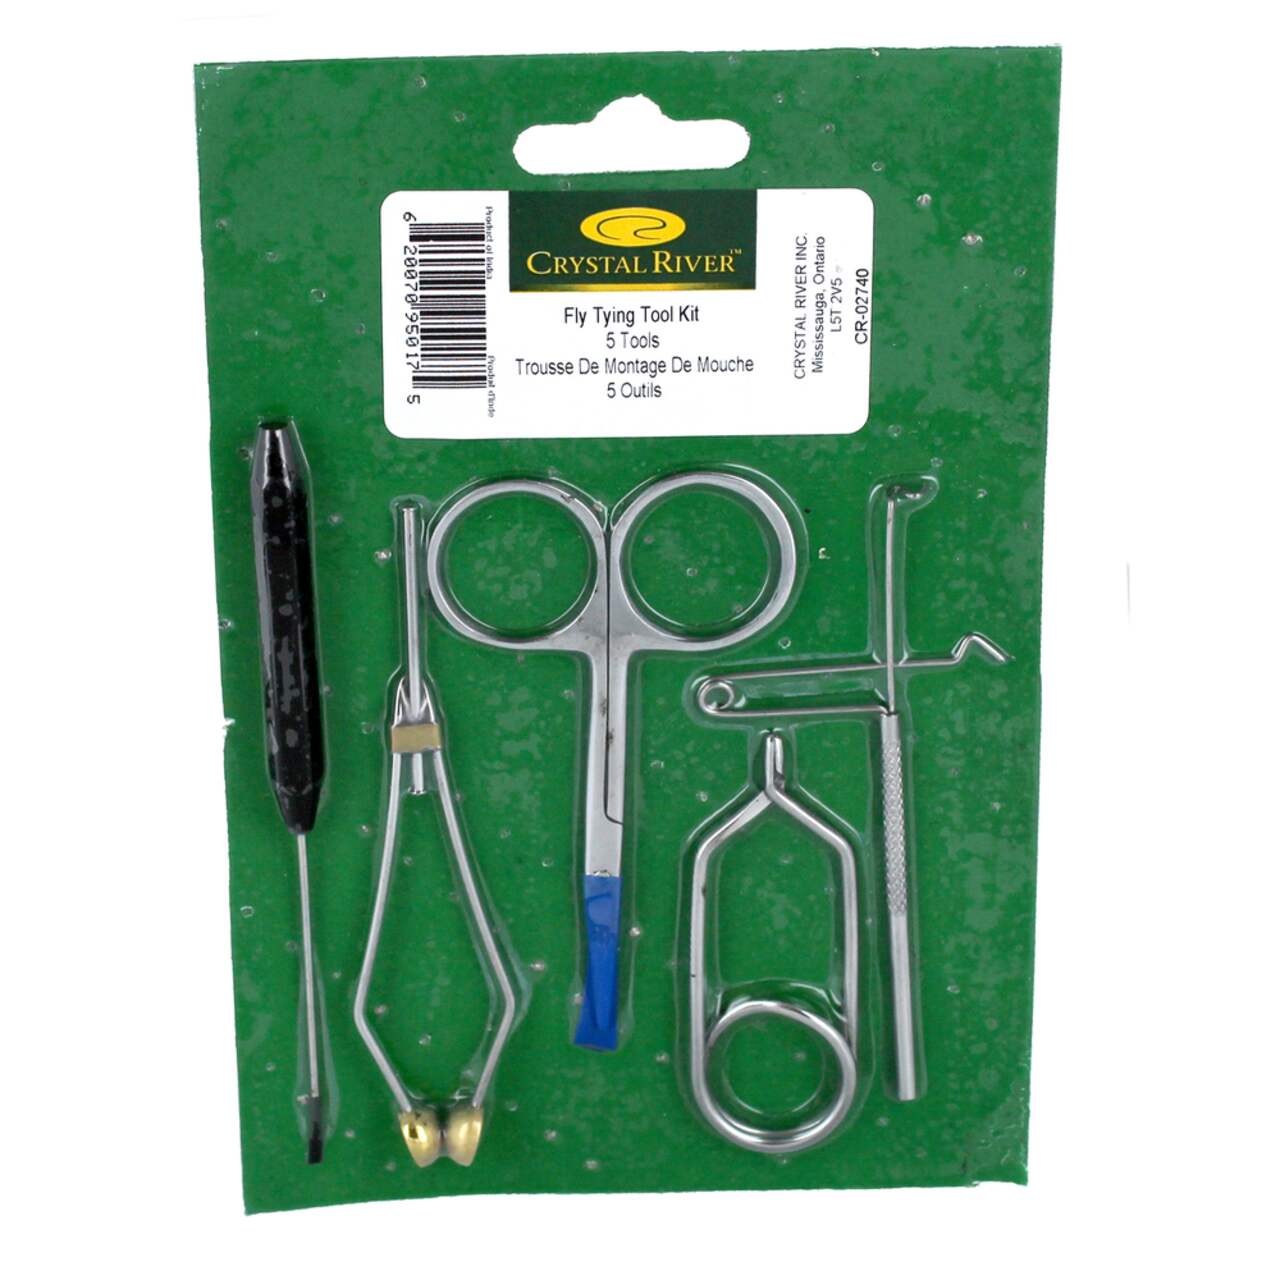 https://media-www.canadiantire.ca/product/playing/fishing/fishing-lures/0772107/crystal-river-fly-tying-tool-kit-5-piece-6a0e6ee4-a88a-460d-acc7-b865a98d9d17.png?imdensity=1&imwidth=640&impolicy=mZoom